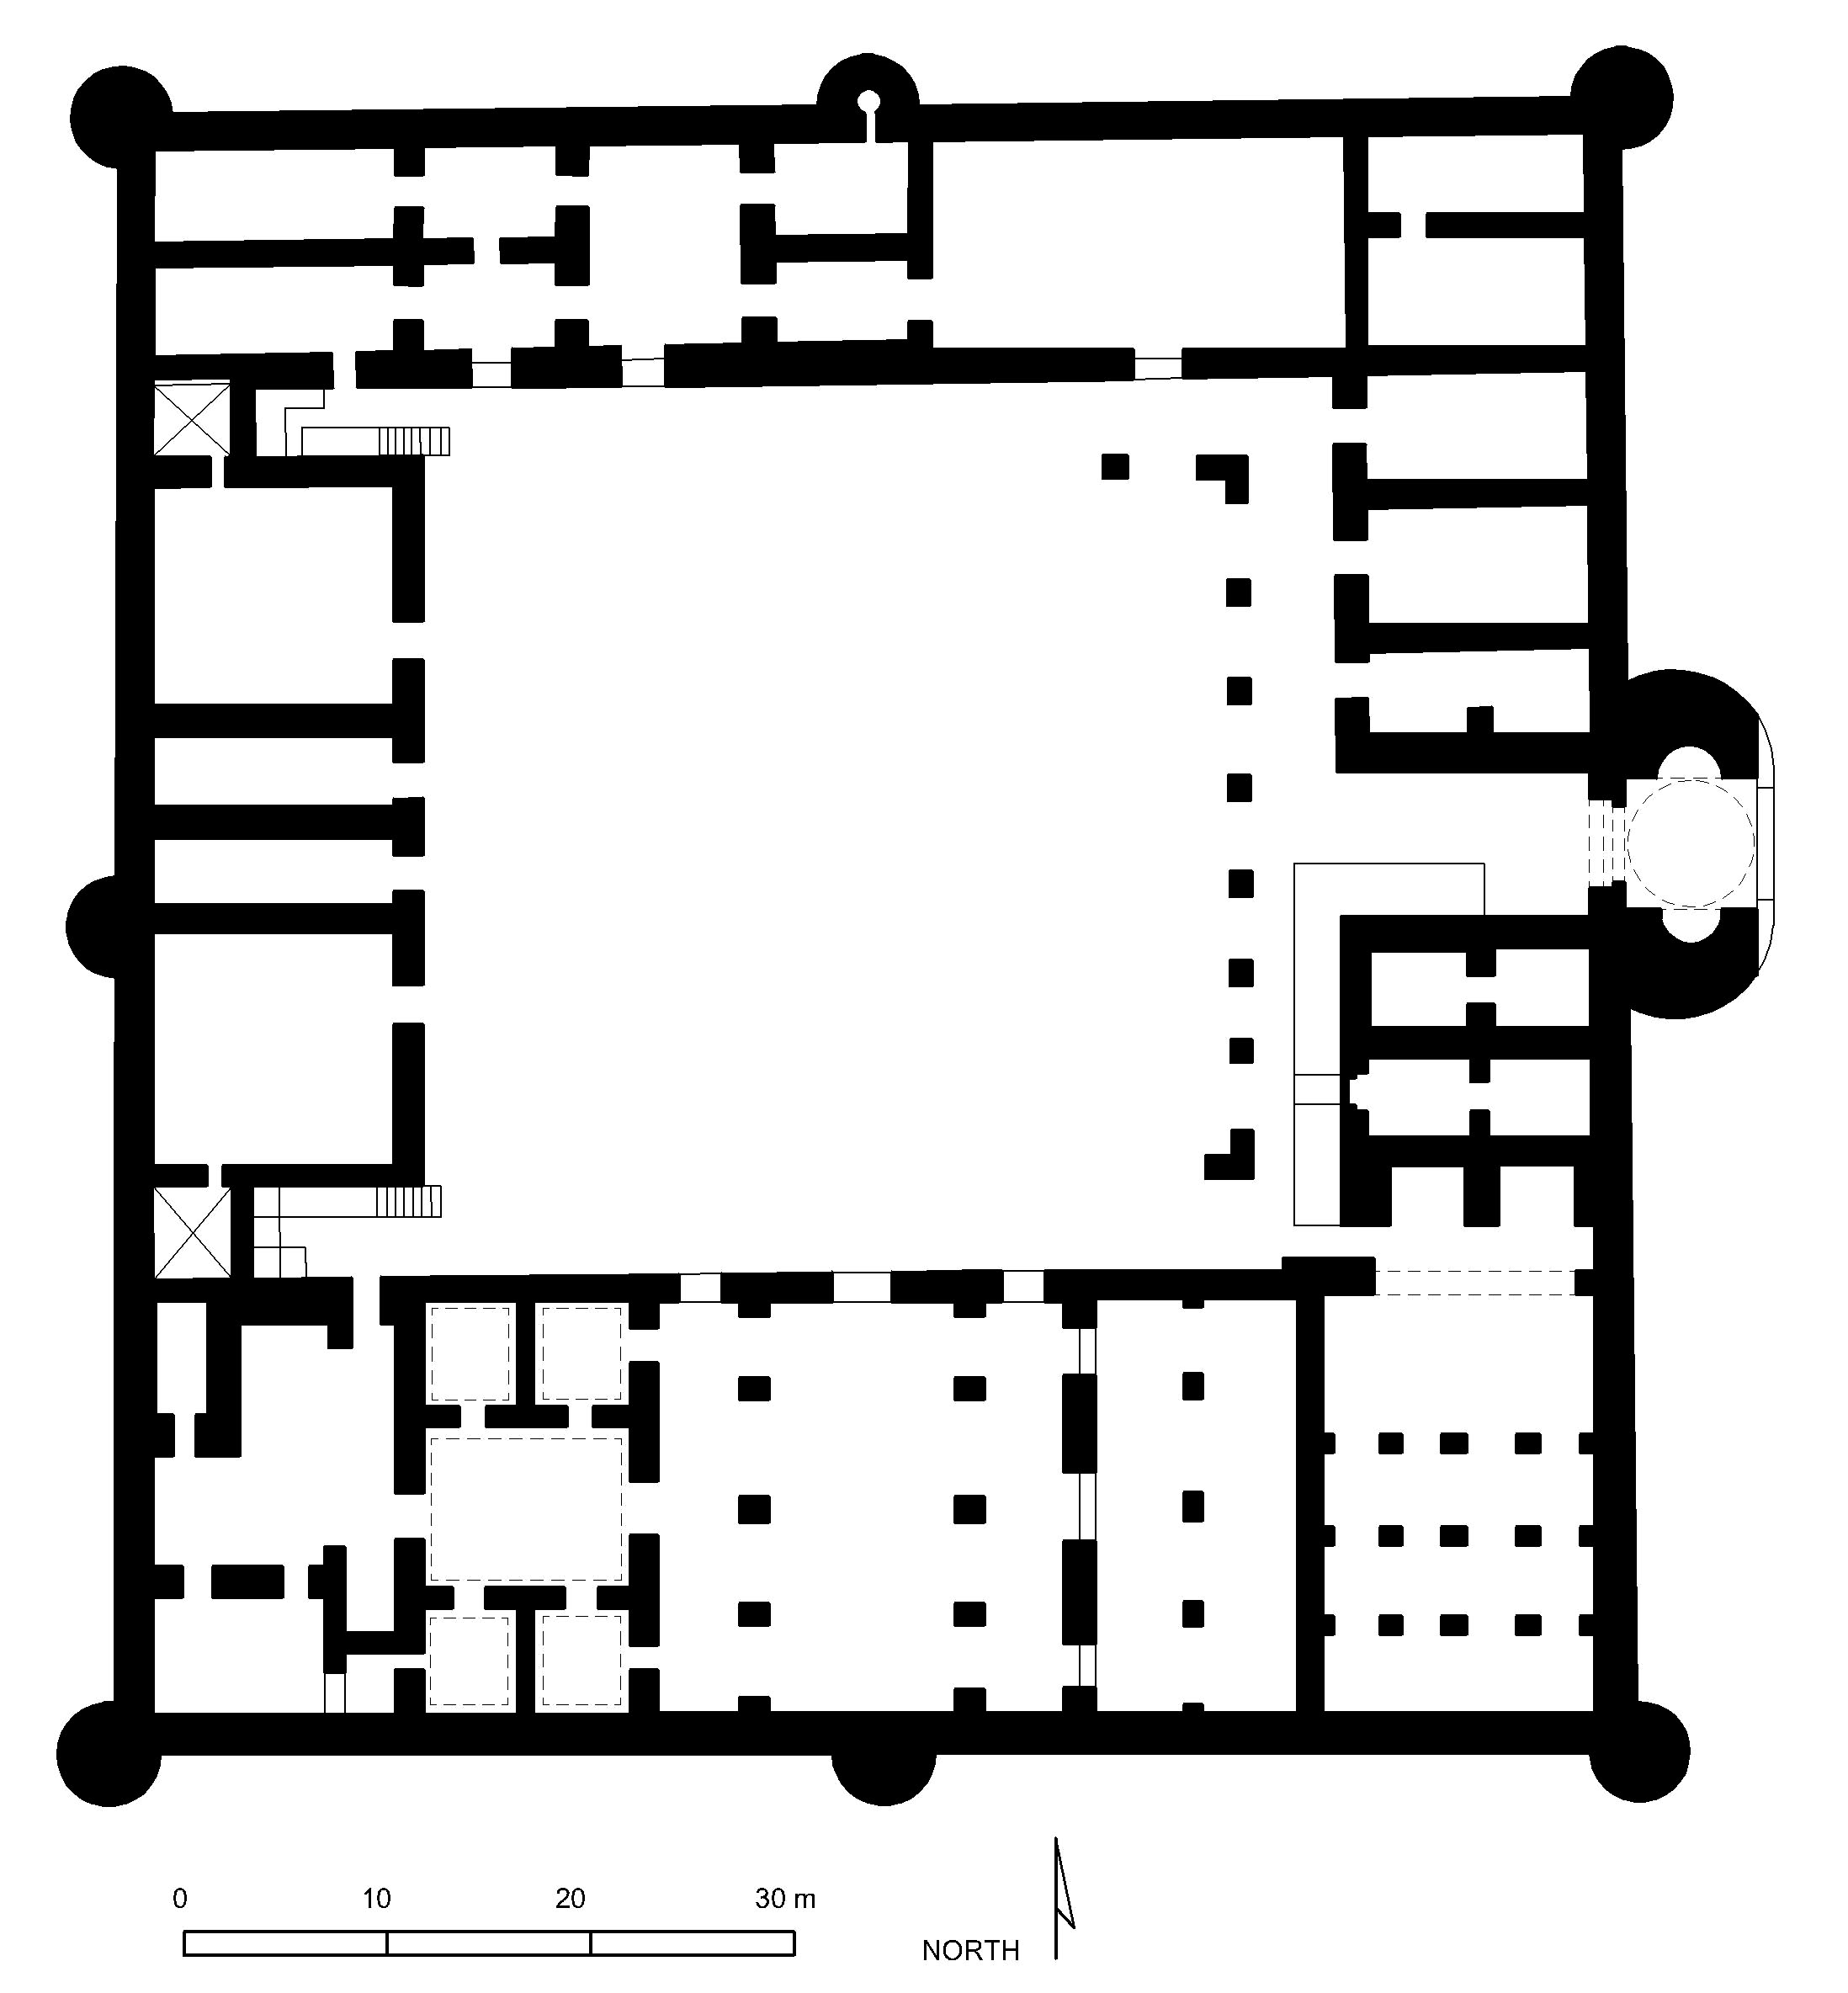 Qasr al-Minya - Floor plan of palace in AutoCAD 2000 format. Click the download button to download a zipped file containing the .dwg file. 